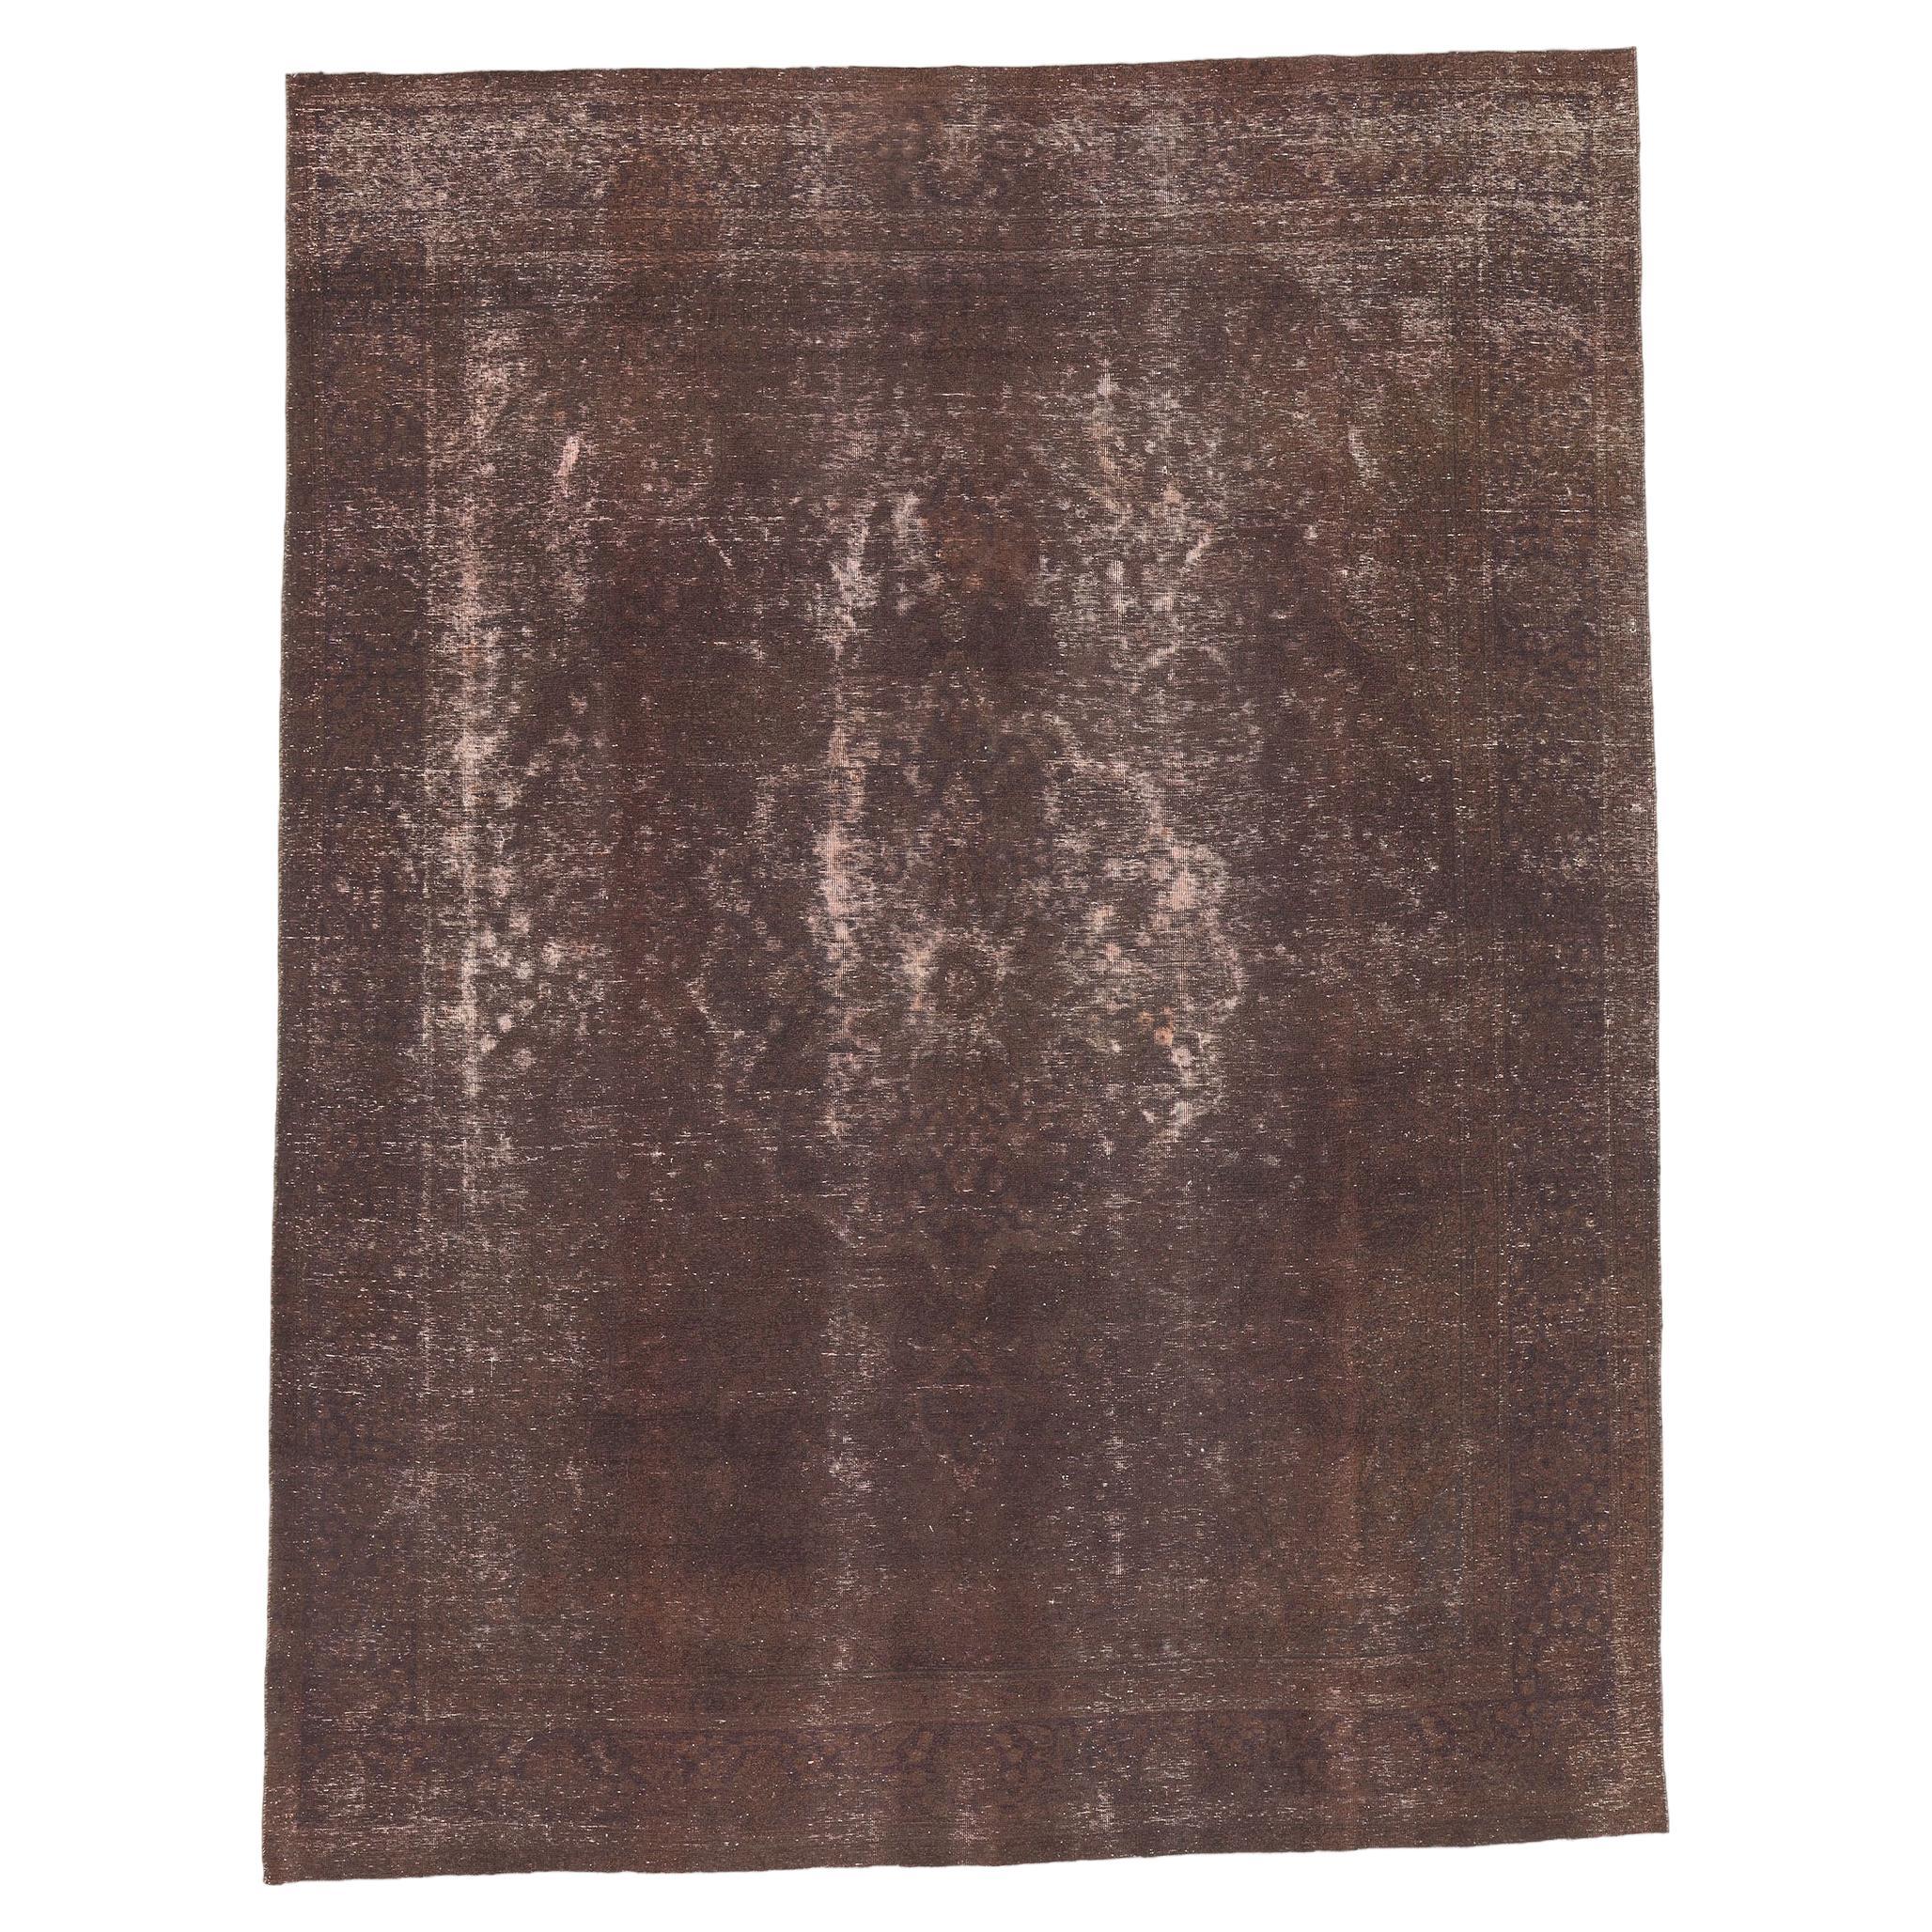 Earth-Tone Vintage Turkish Overdyed Rug, Modern Industrial Meets Luxury Lodge For Sale